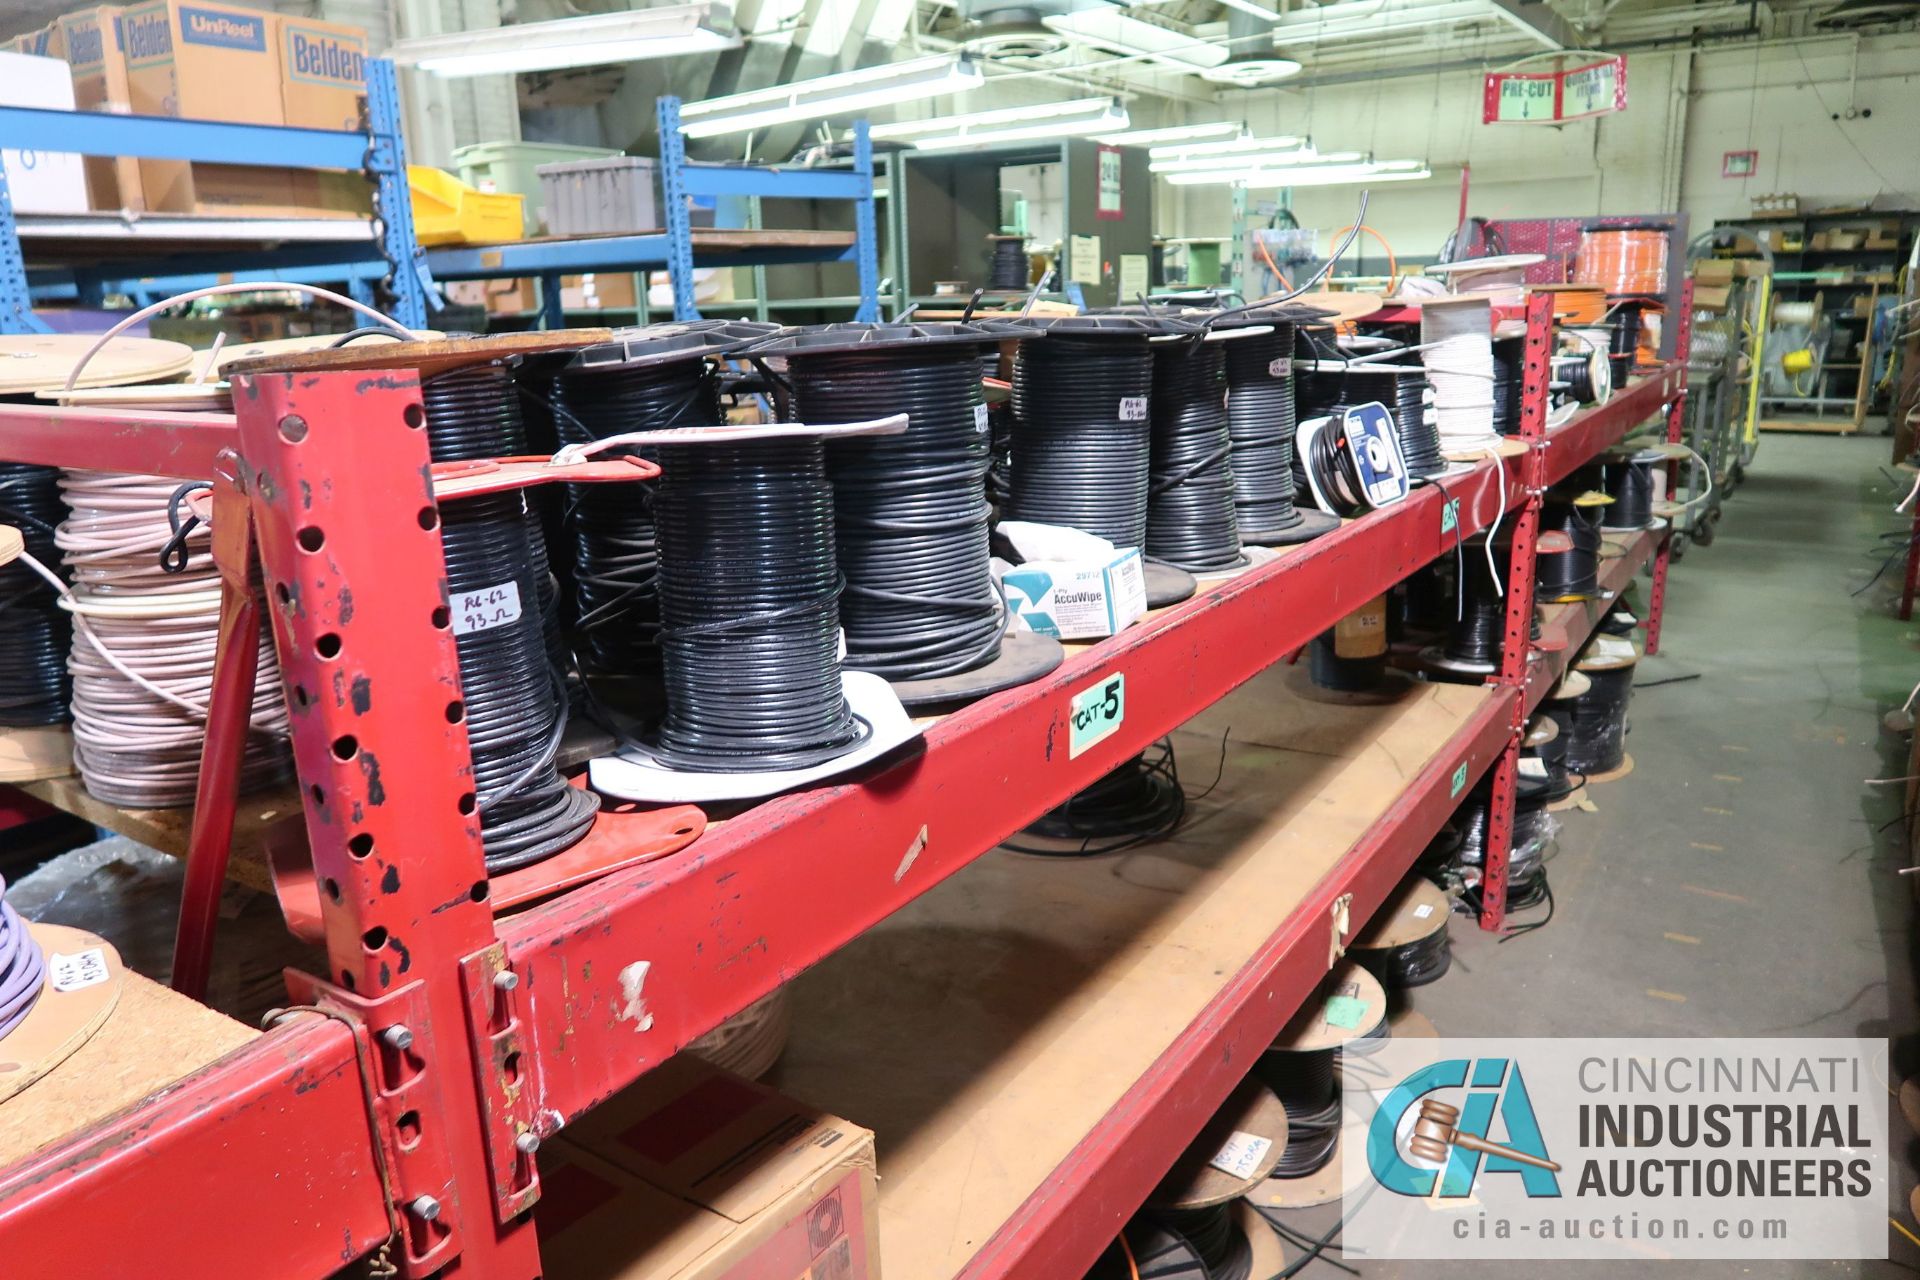 (LOT) LARGE QUANTITY OF COAX CABLE ON (3) SECTIONS RED RACK - APPROX. (130) SPOOLS - SOLD BY THE - Image 12 of 14